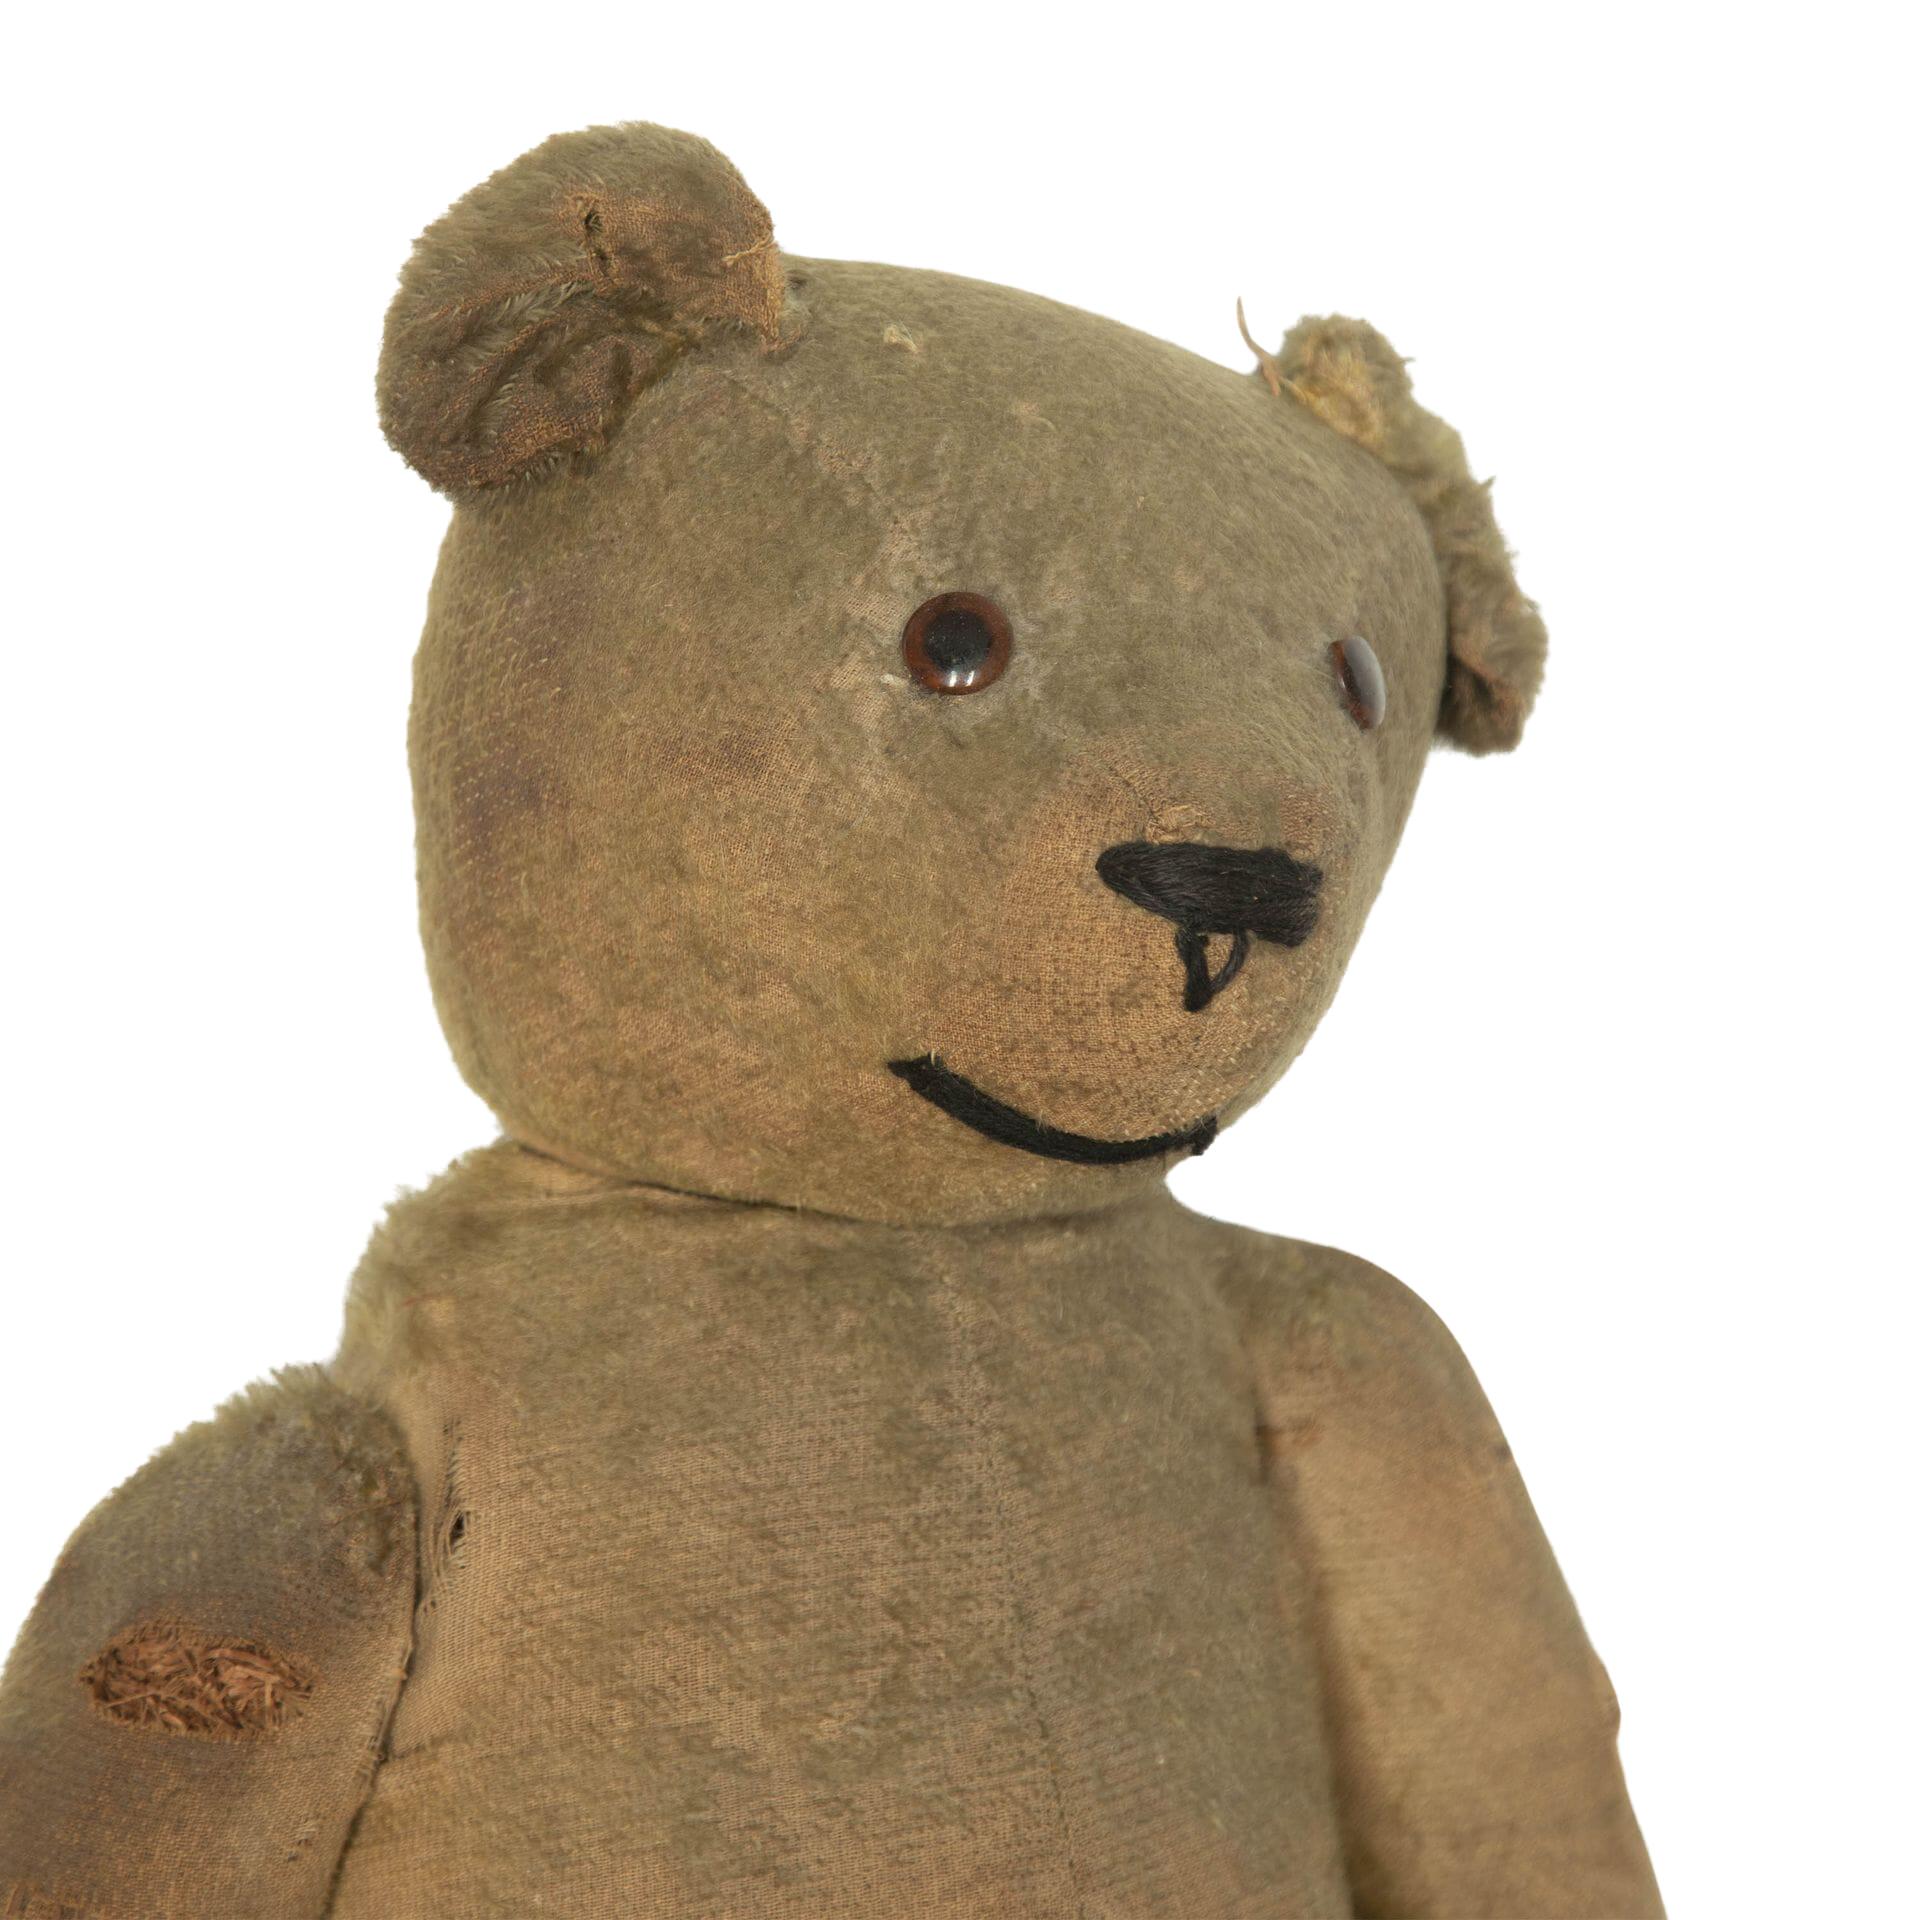 19th century Teddy bear with charming time worn patina